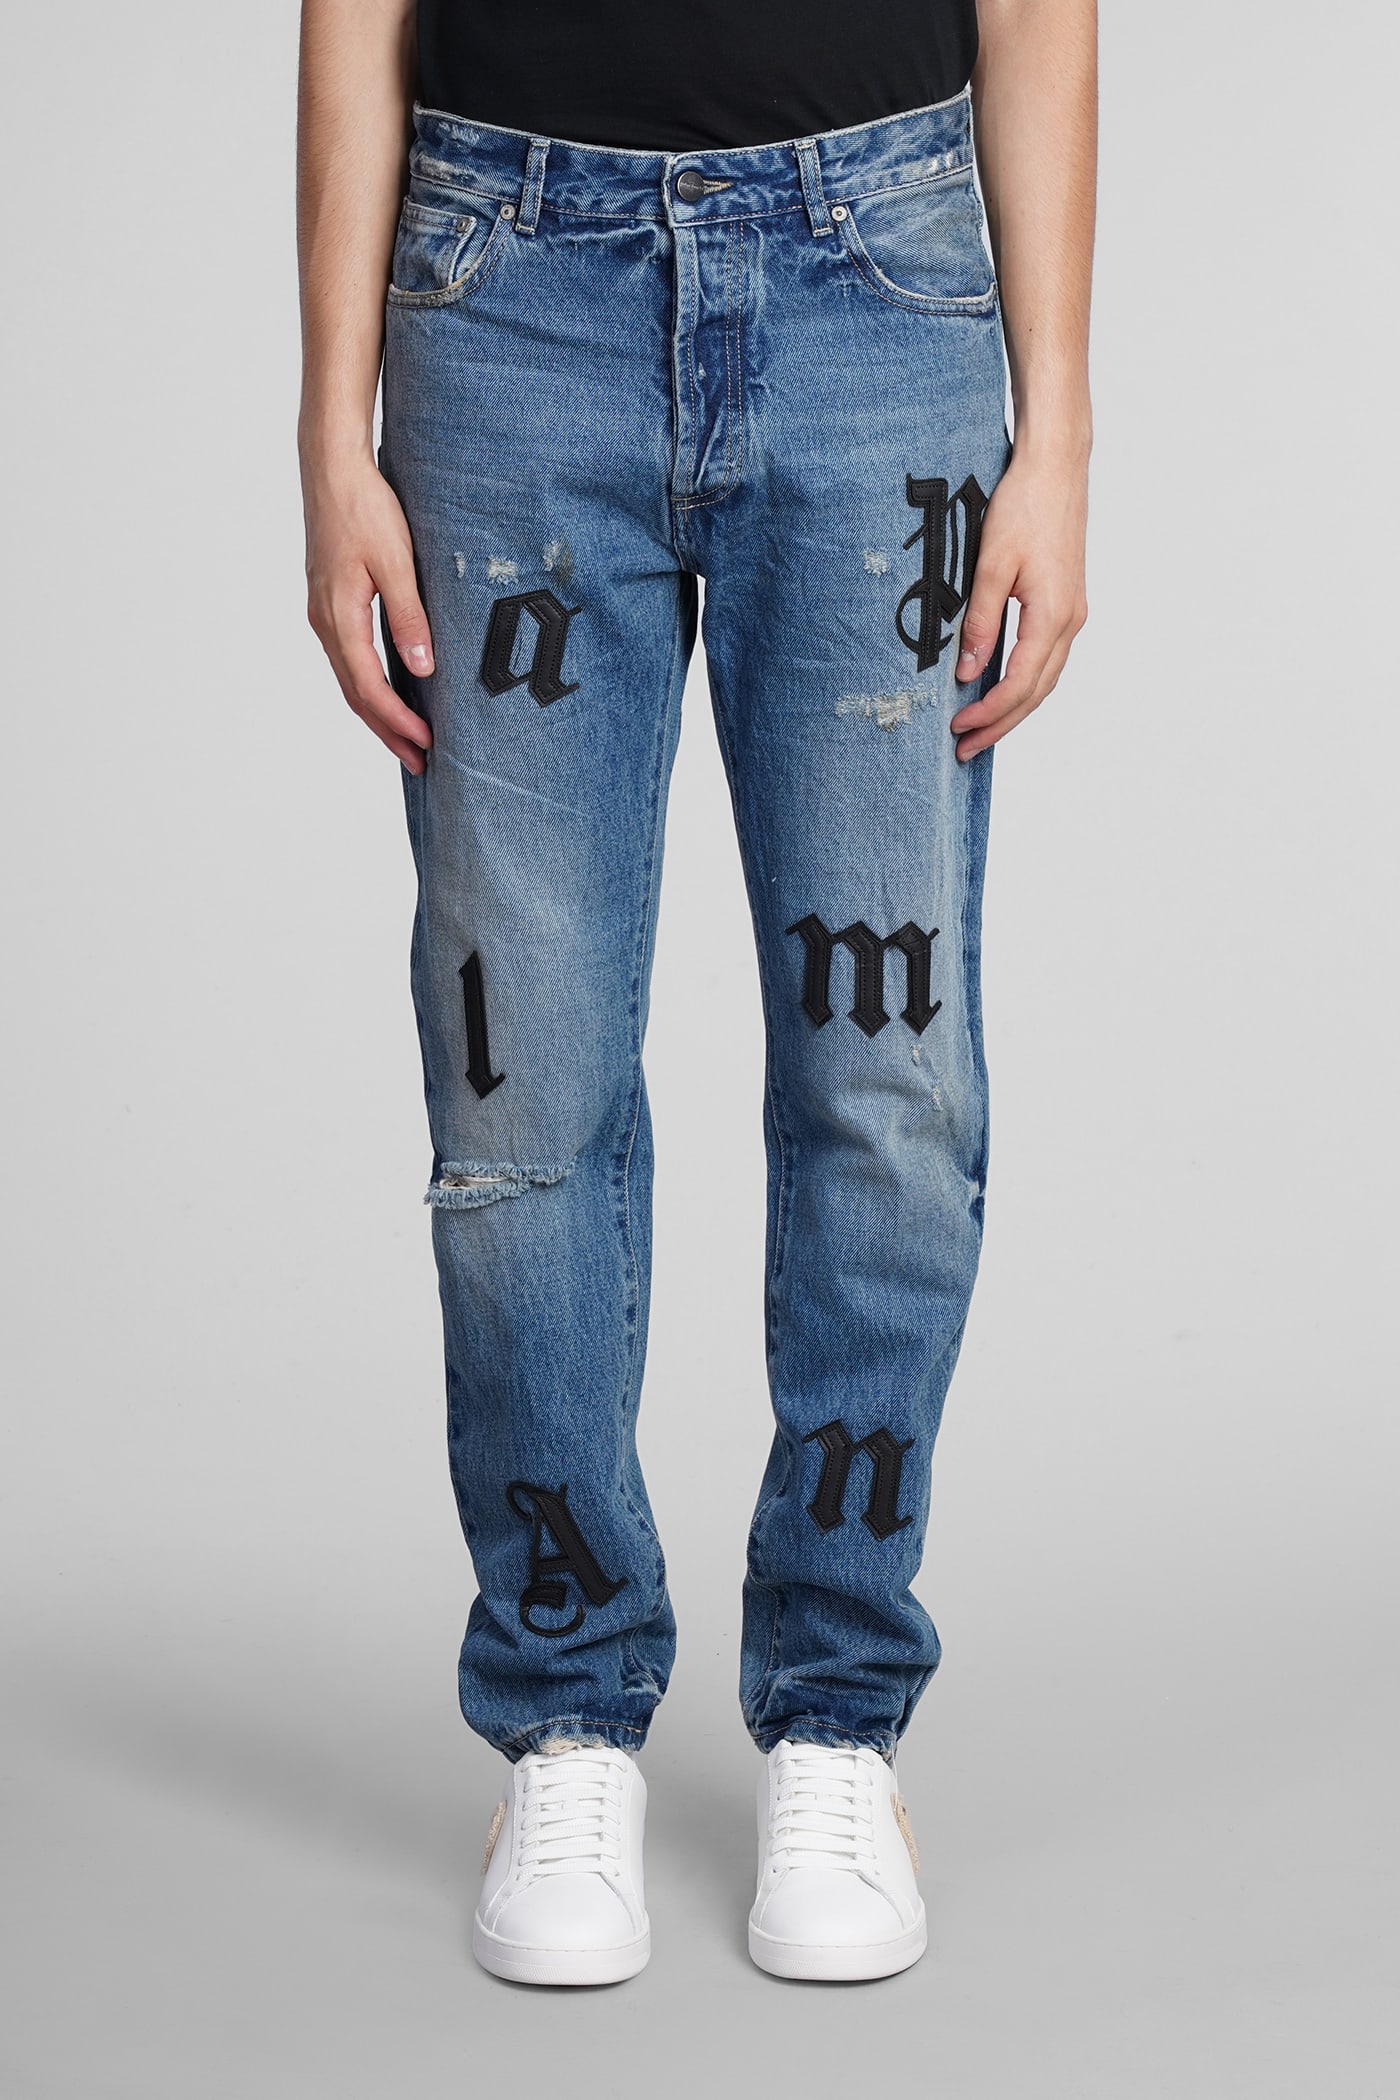 Palm Angels Jeans In Blue Denim